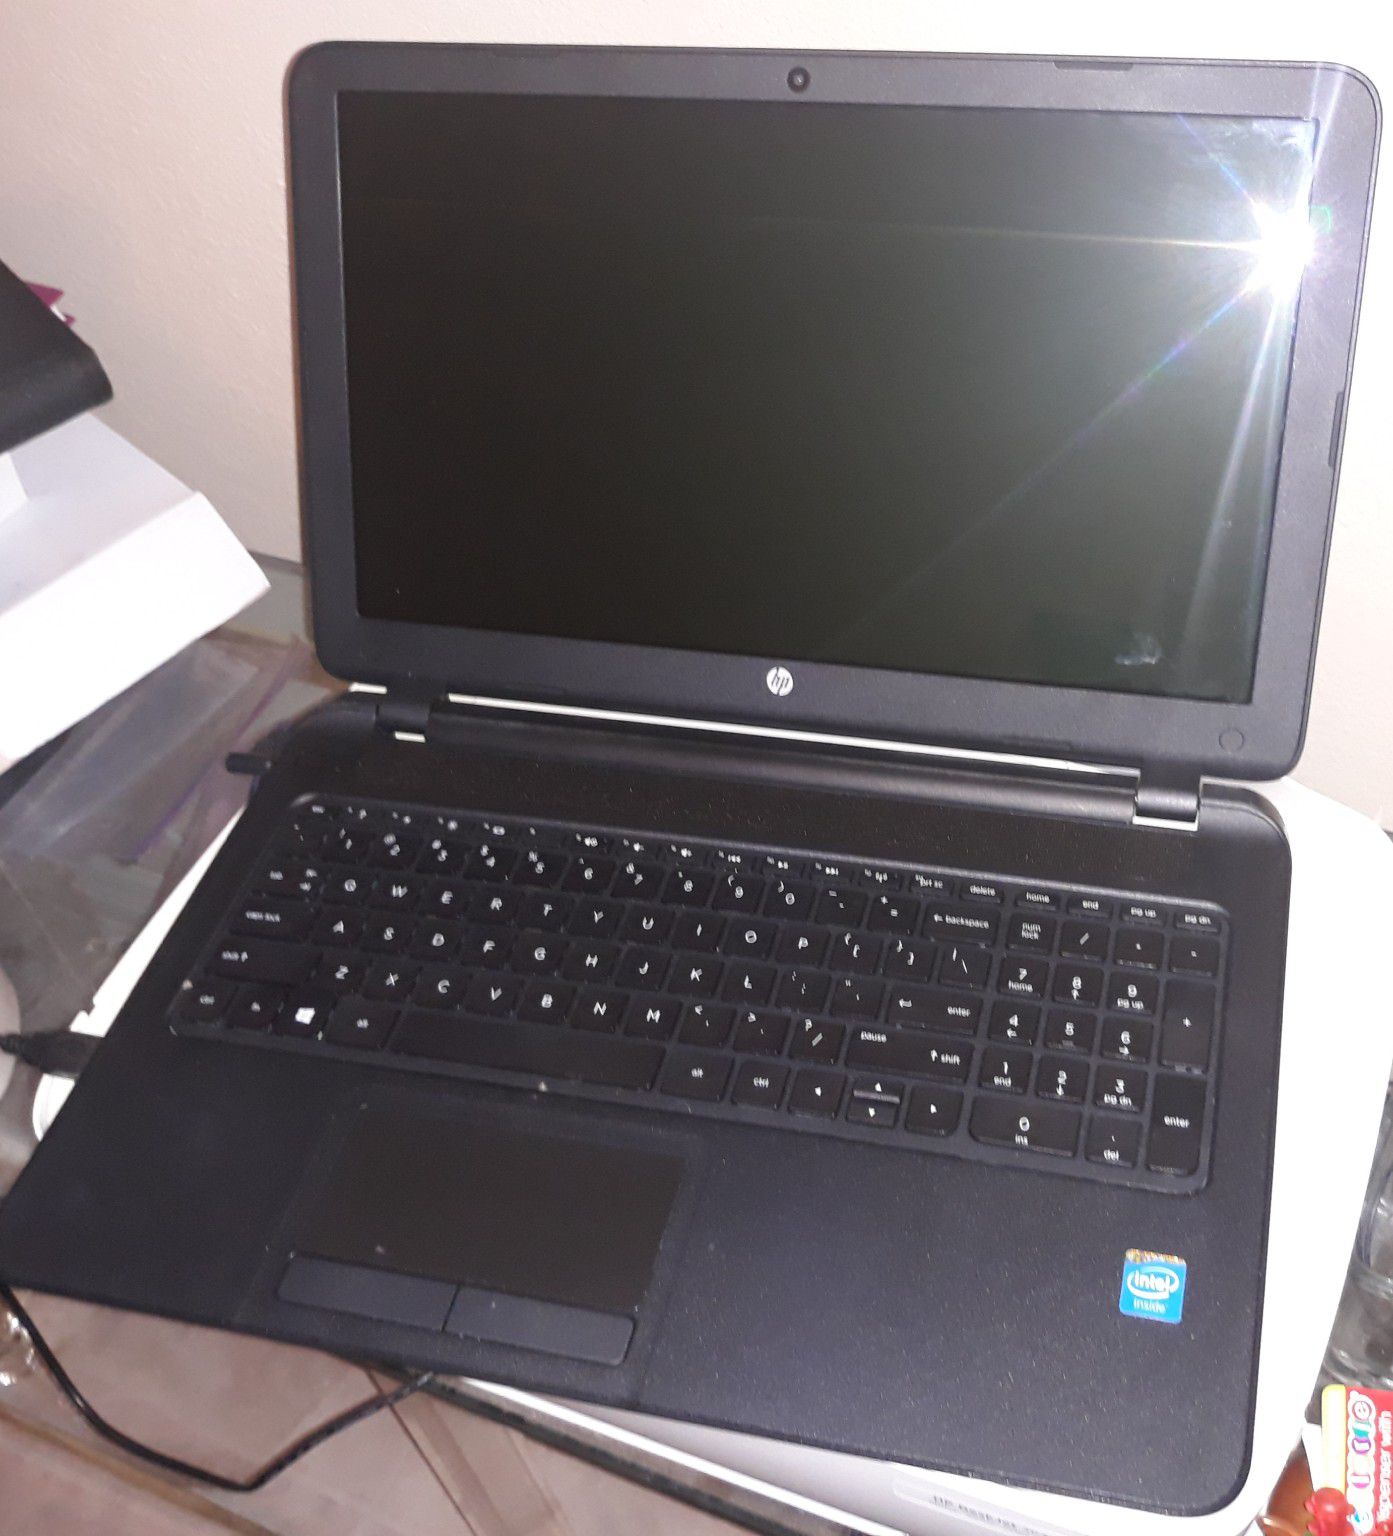 Hp touchscreen laptop and hp printer